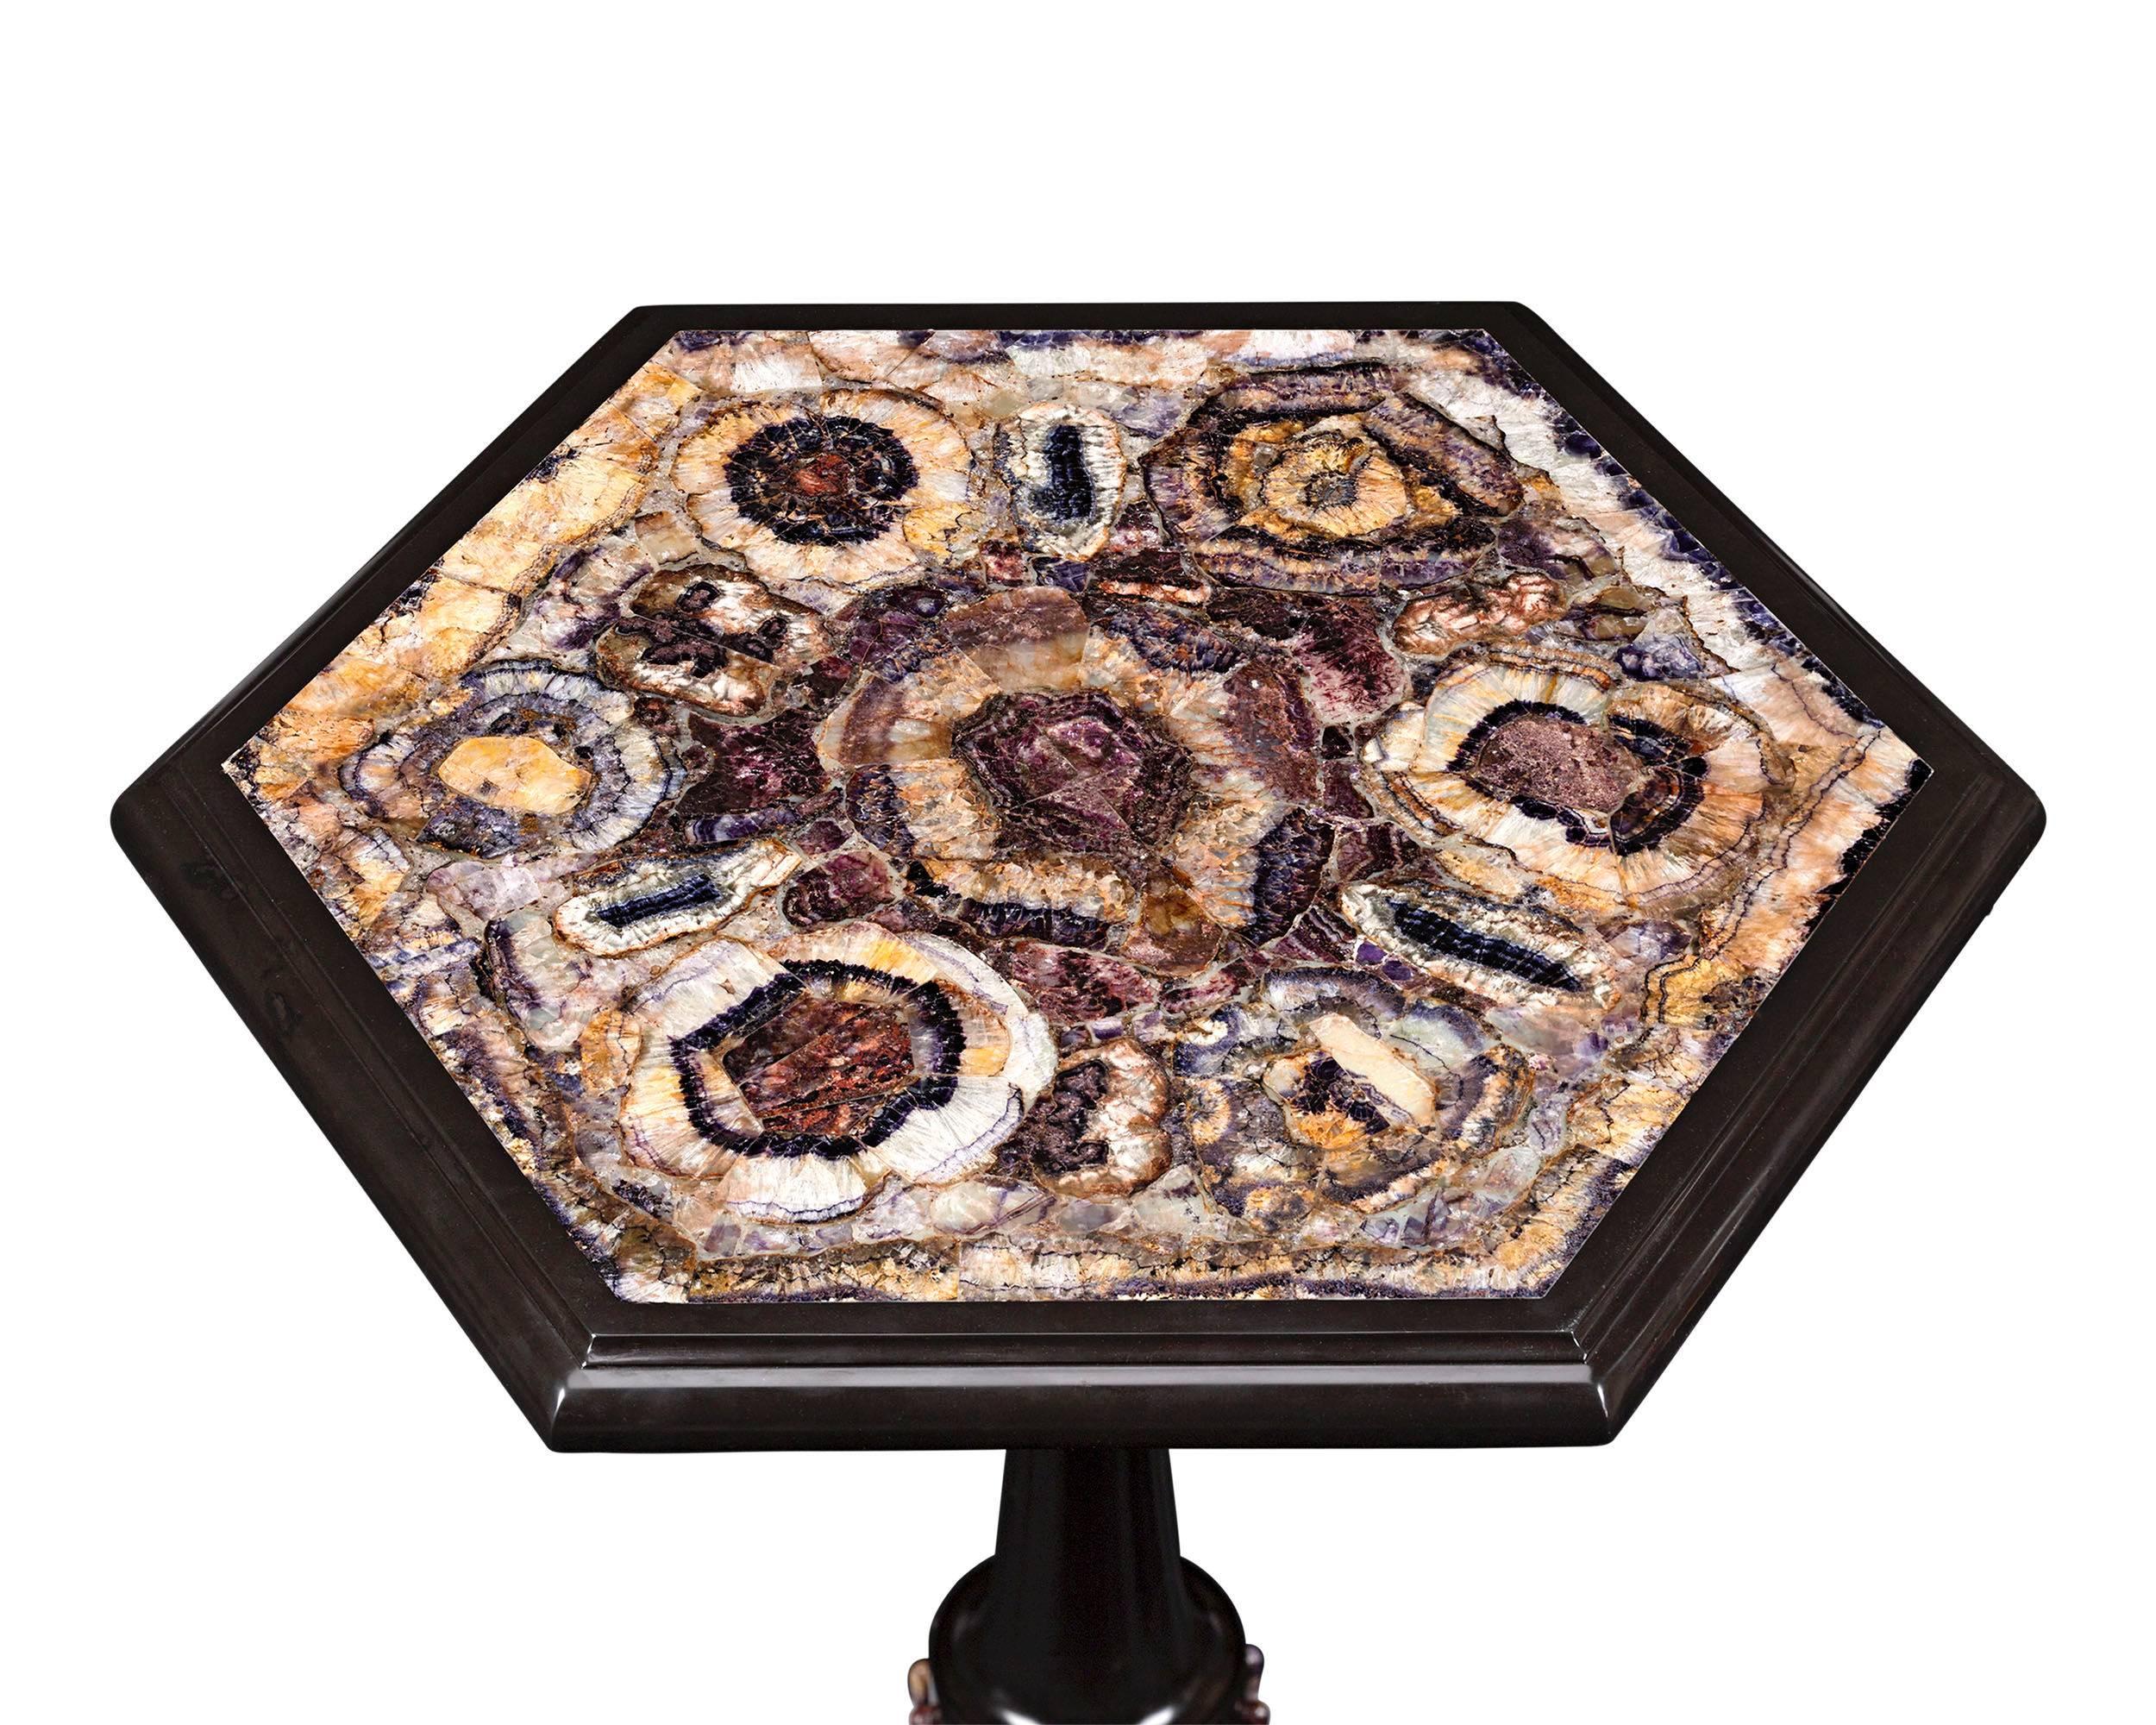 The inset surface of this superb Victorian-period tripartite table bears a stunning example of Derbyshire Blue John, one of the rarest and most coveted minerals in the world. The exceptional design showcases the unique qualities for which Blue John